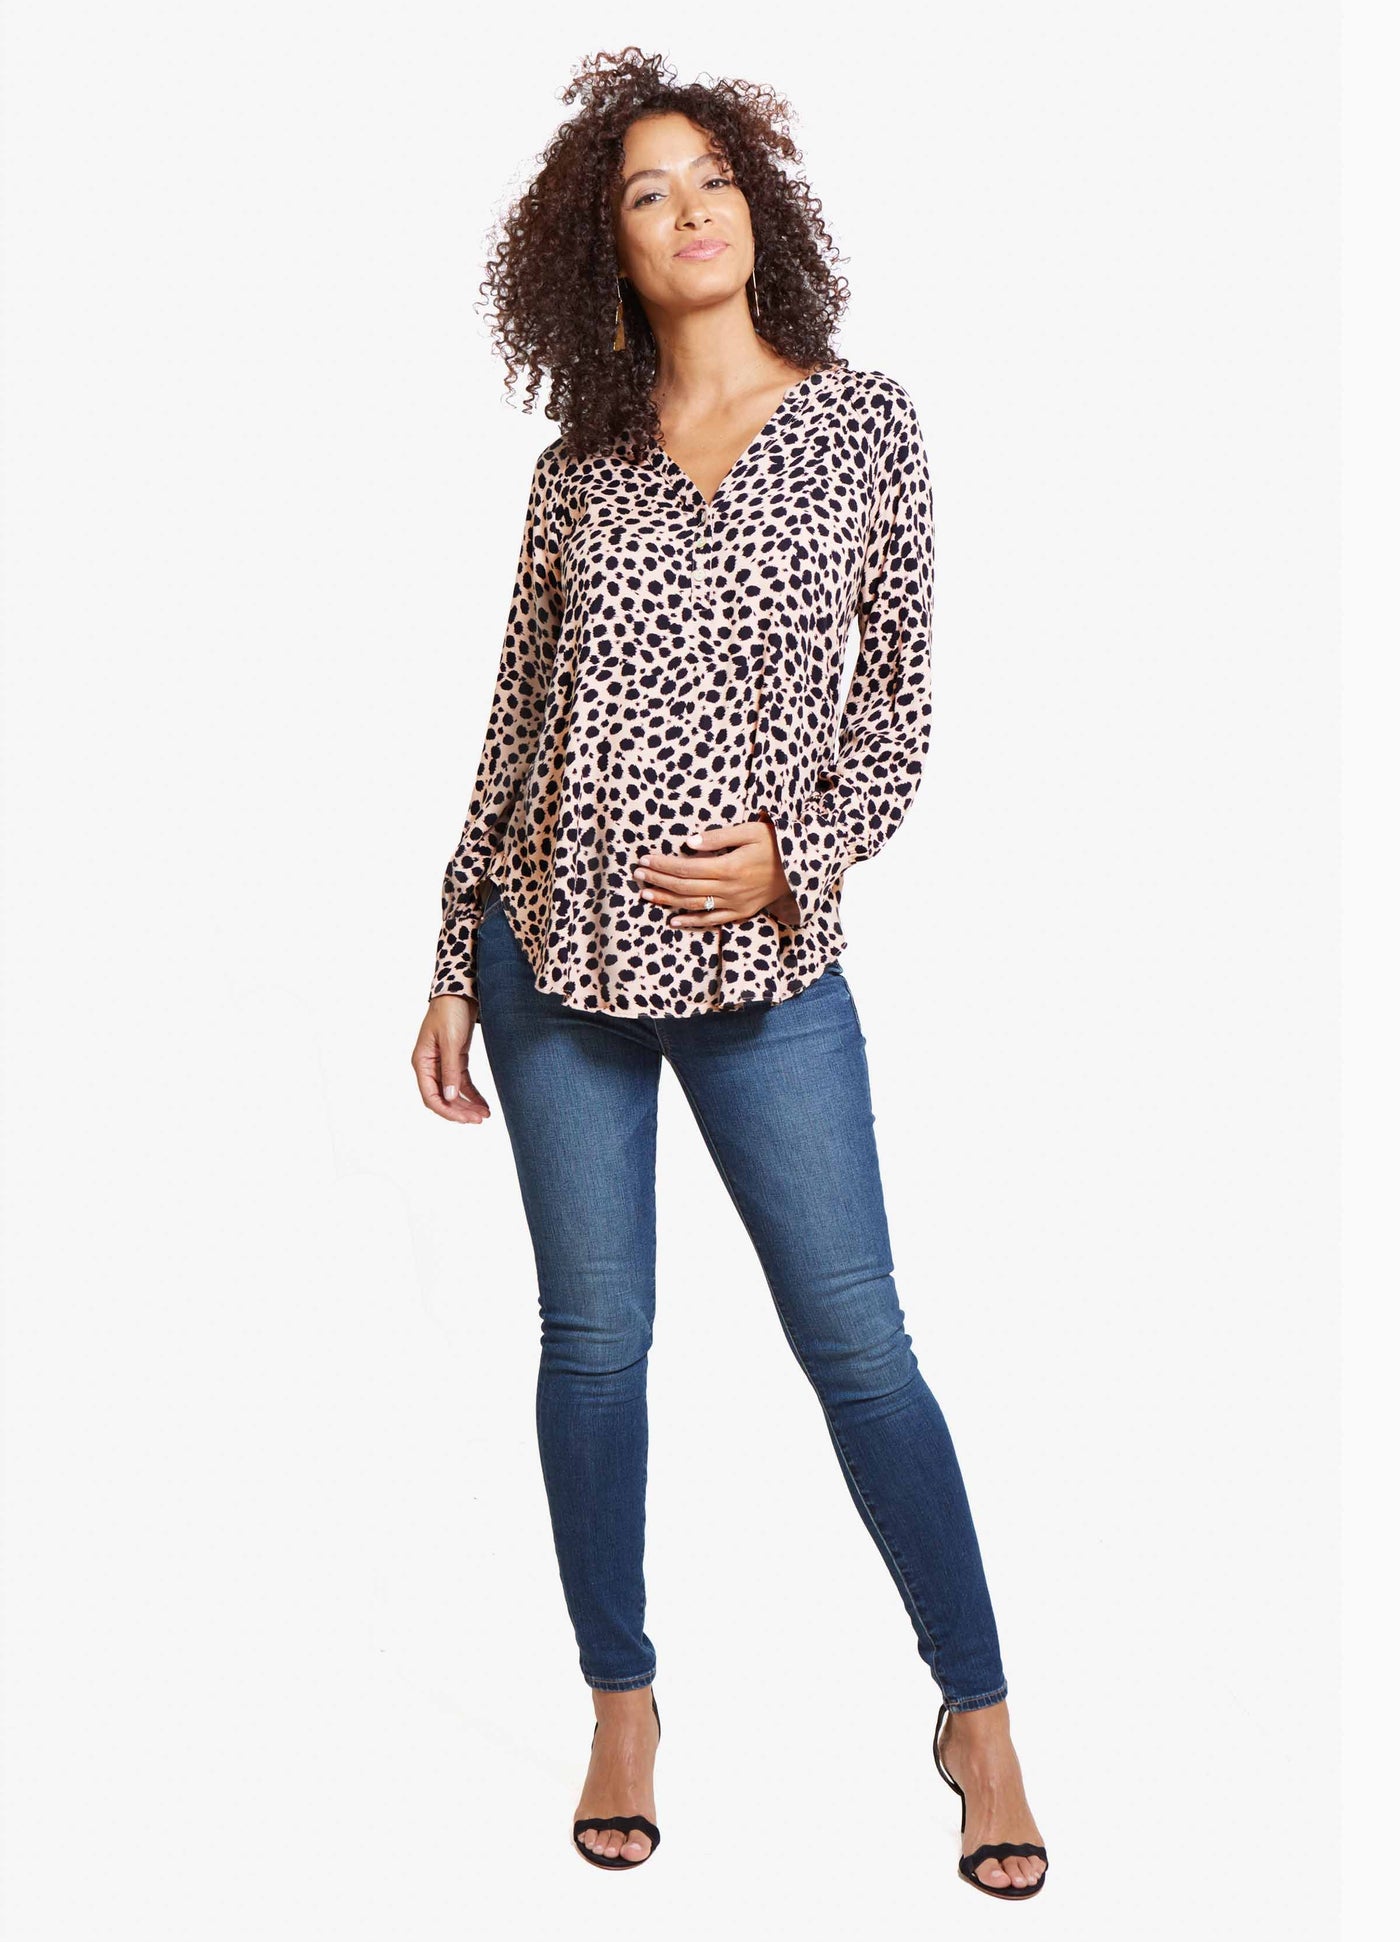 Model is 5’10”, 4 months pregnant, and wearing size small ||Leopard